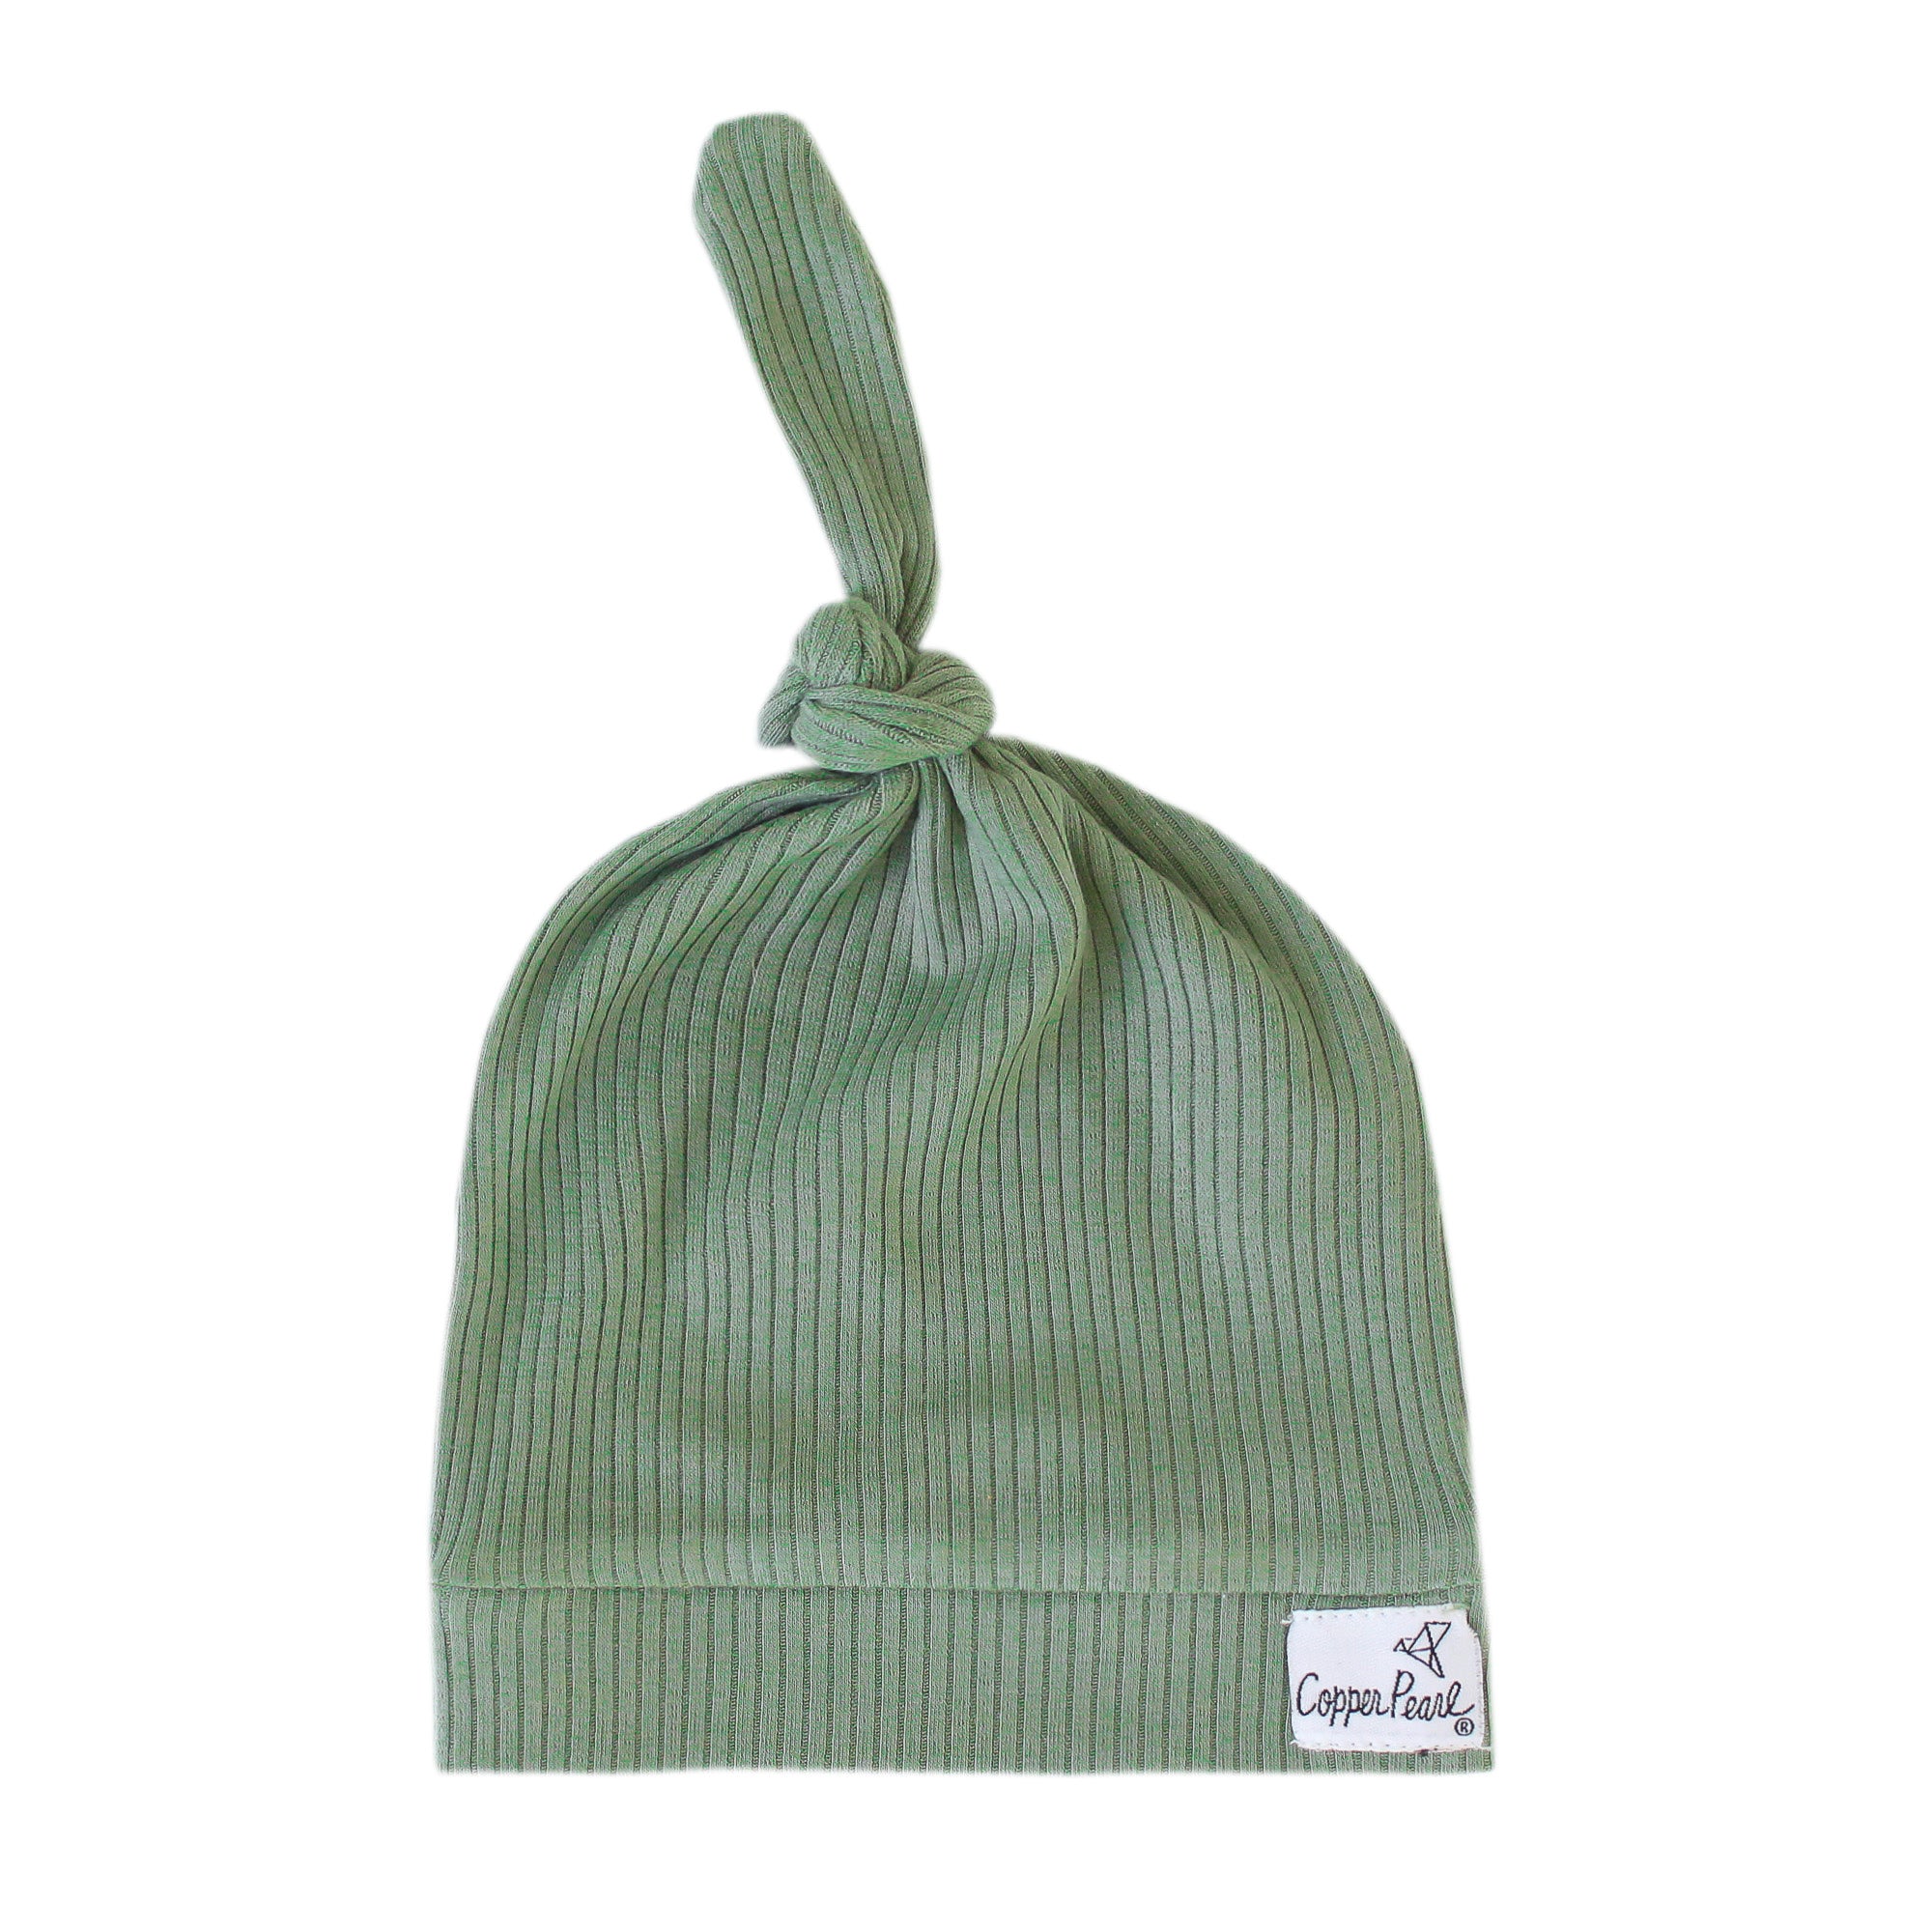 Rib Knit Top Knot Hat - Clover